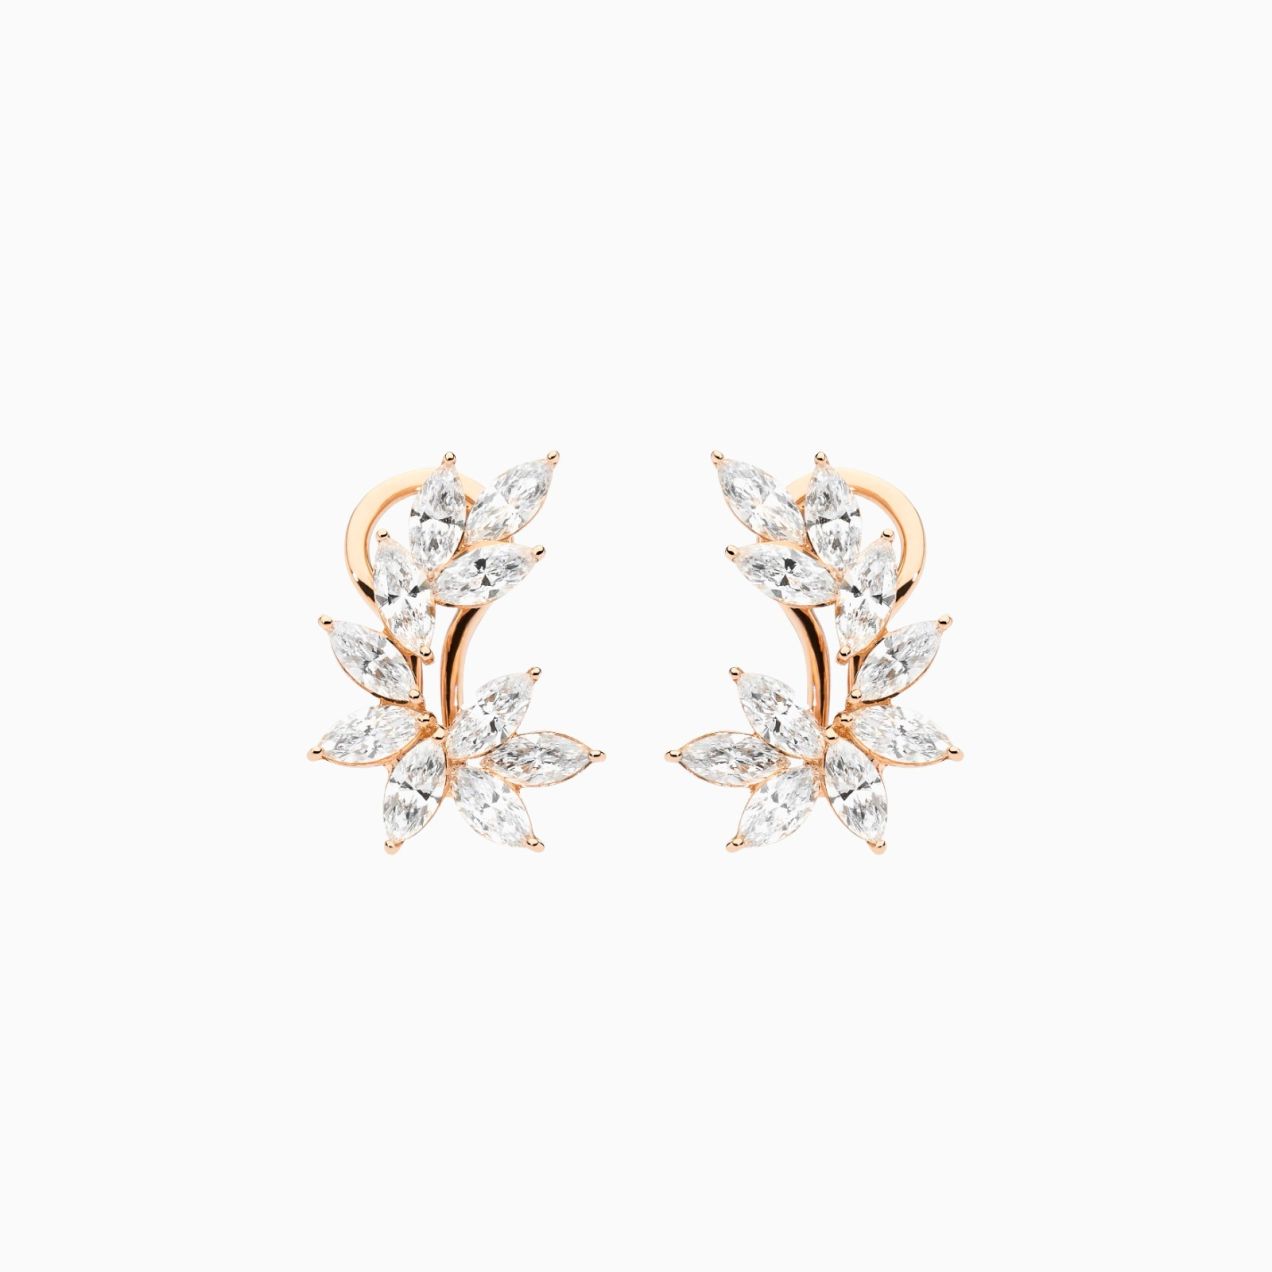 Rose gold earrings with diamonds